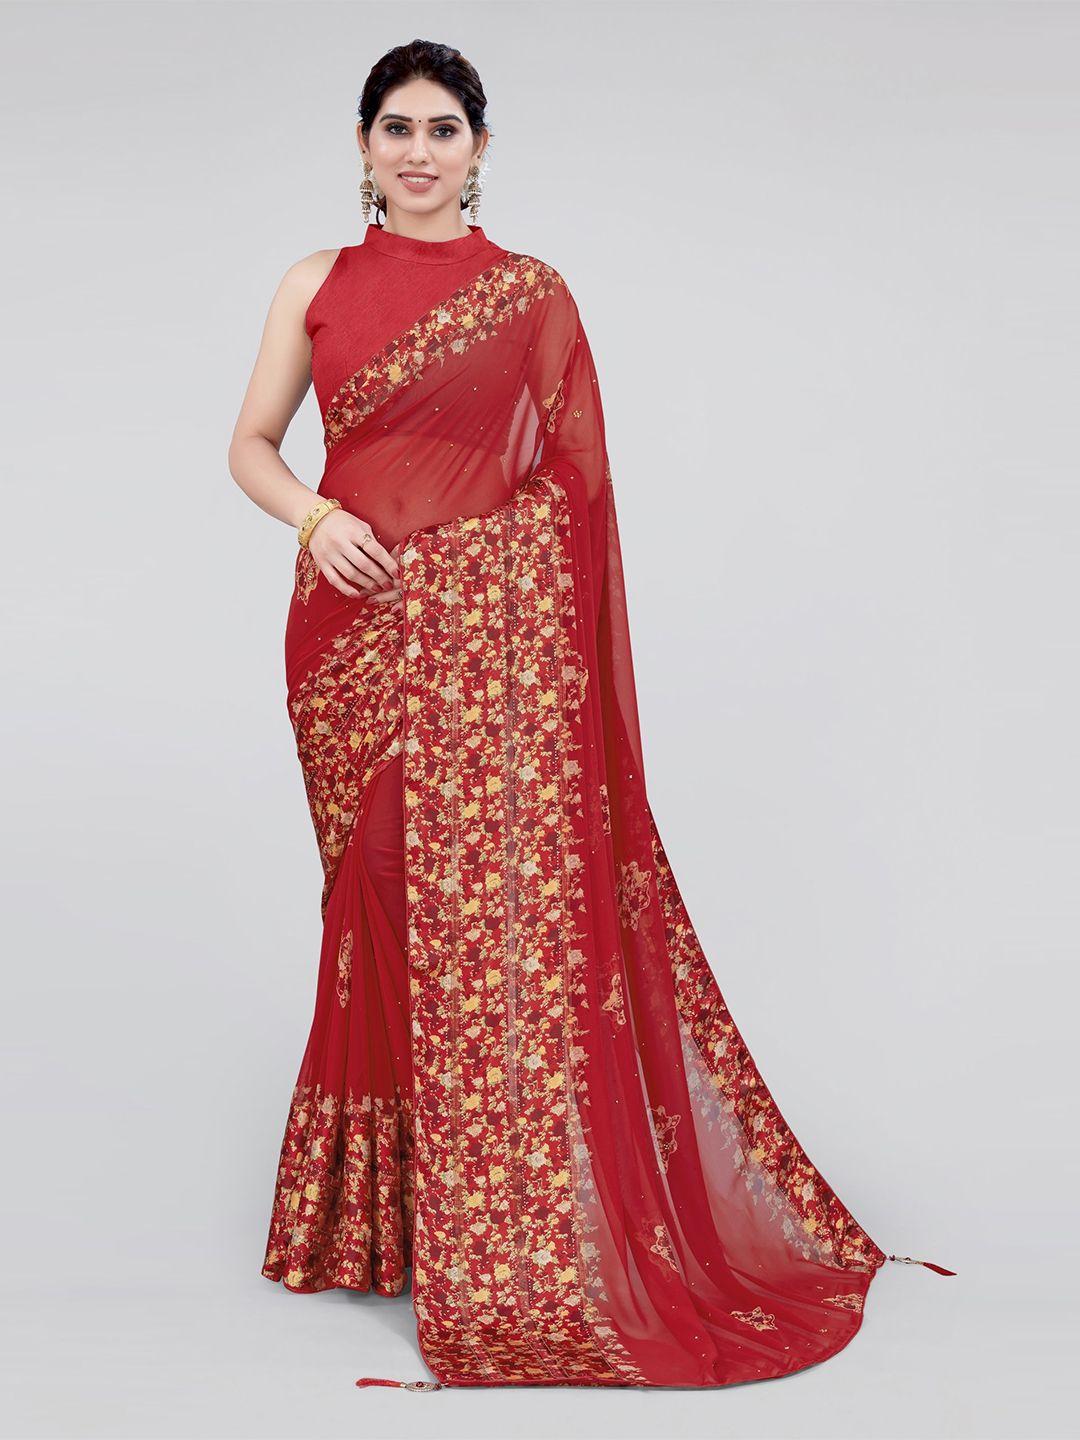 MIRCHI FASHION Floral Beads and Stones Saree